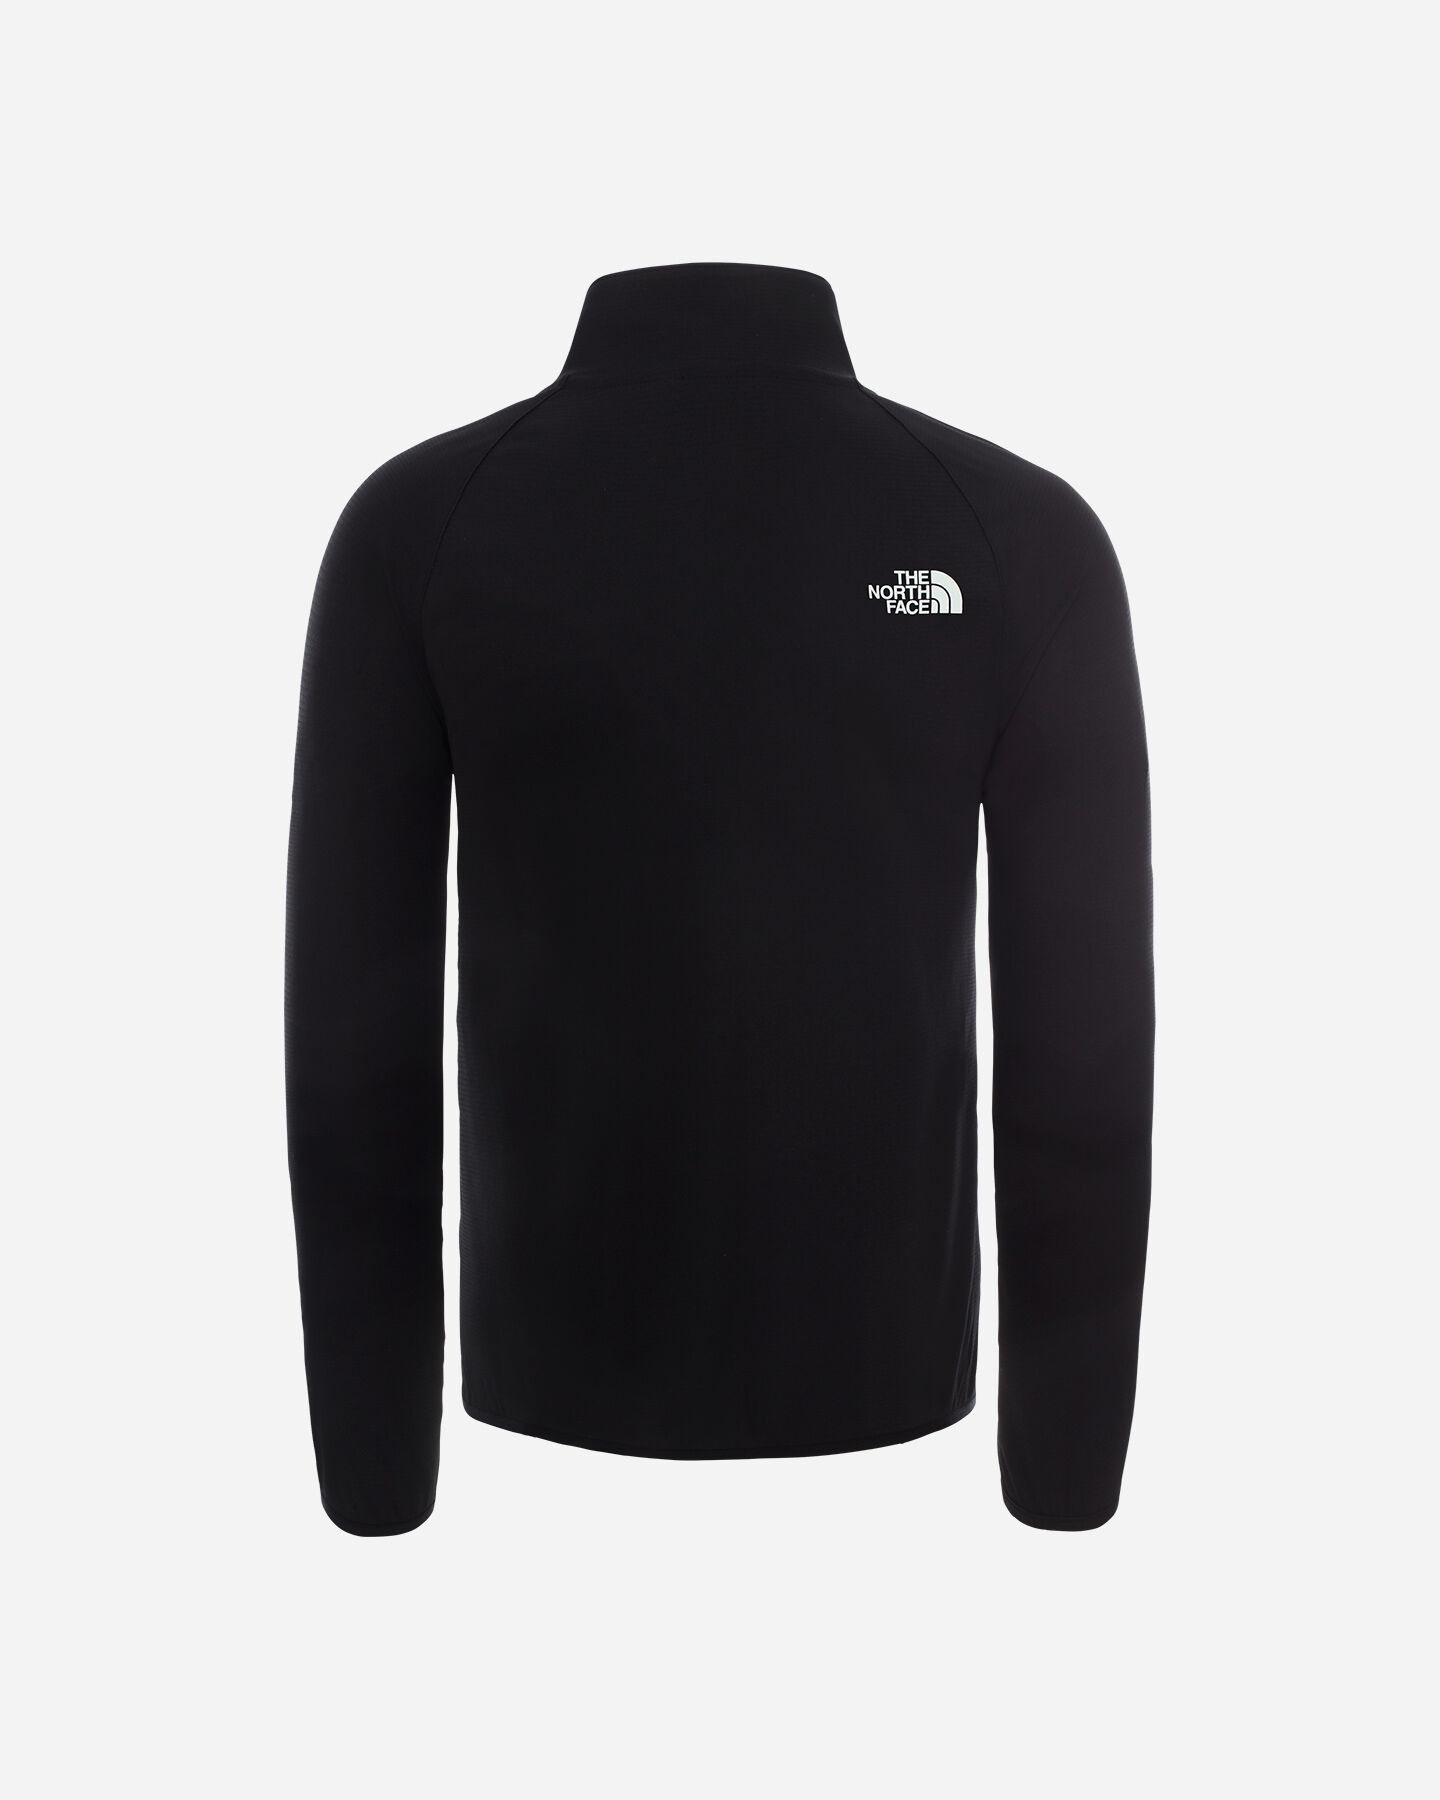  Pile THE NORTH FACE EXTENT III M S5181599|JK3|S scatto 1